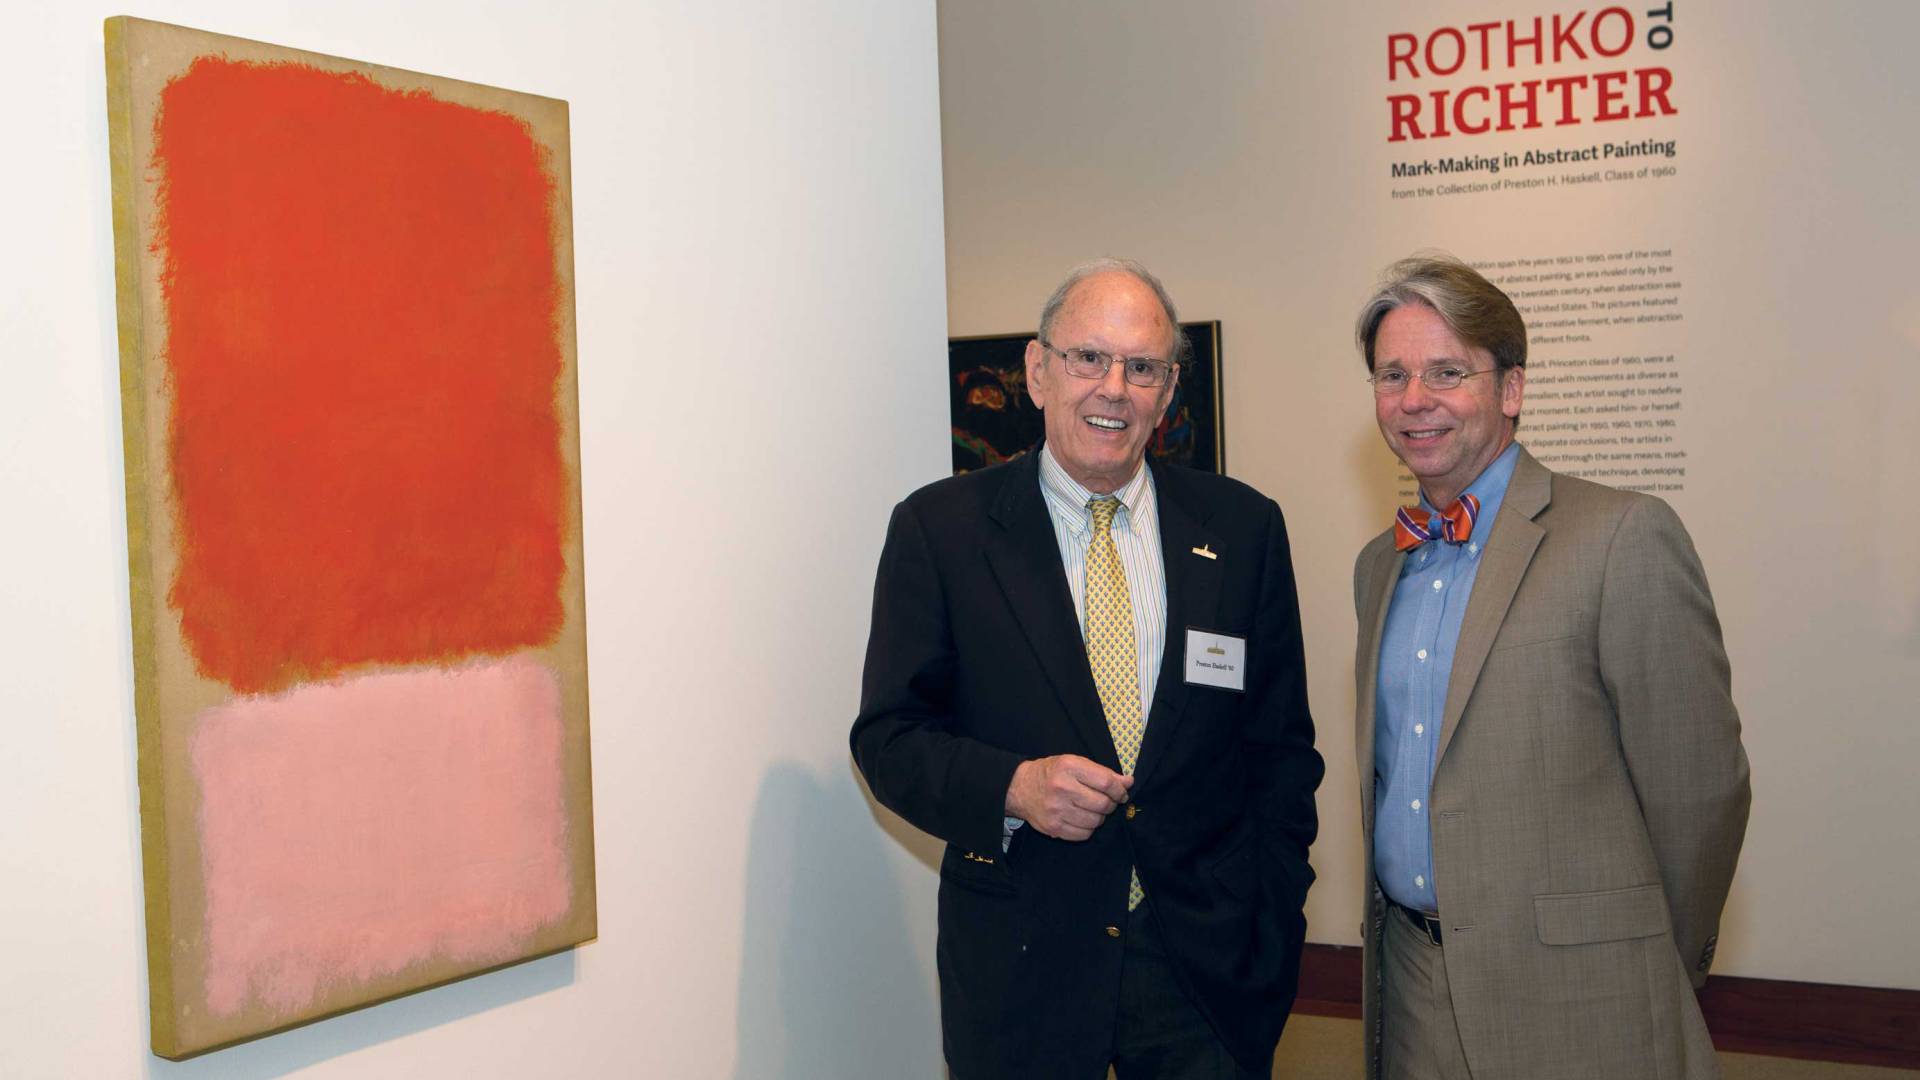 Preston Haskell and James Steward stand next to a painting by Mark Rothko